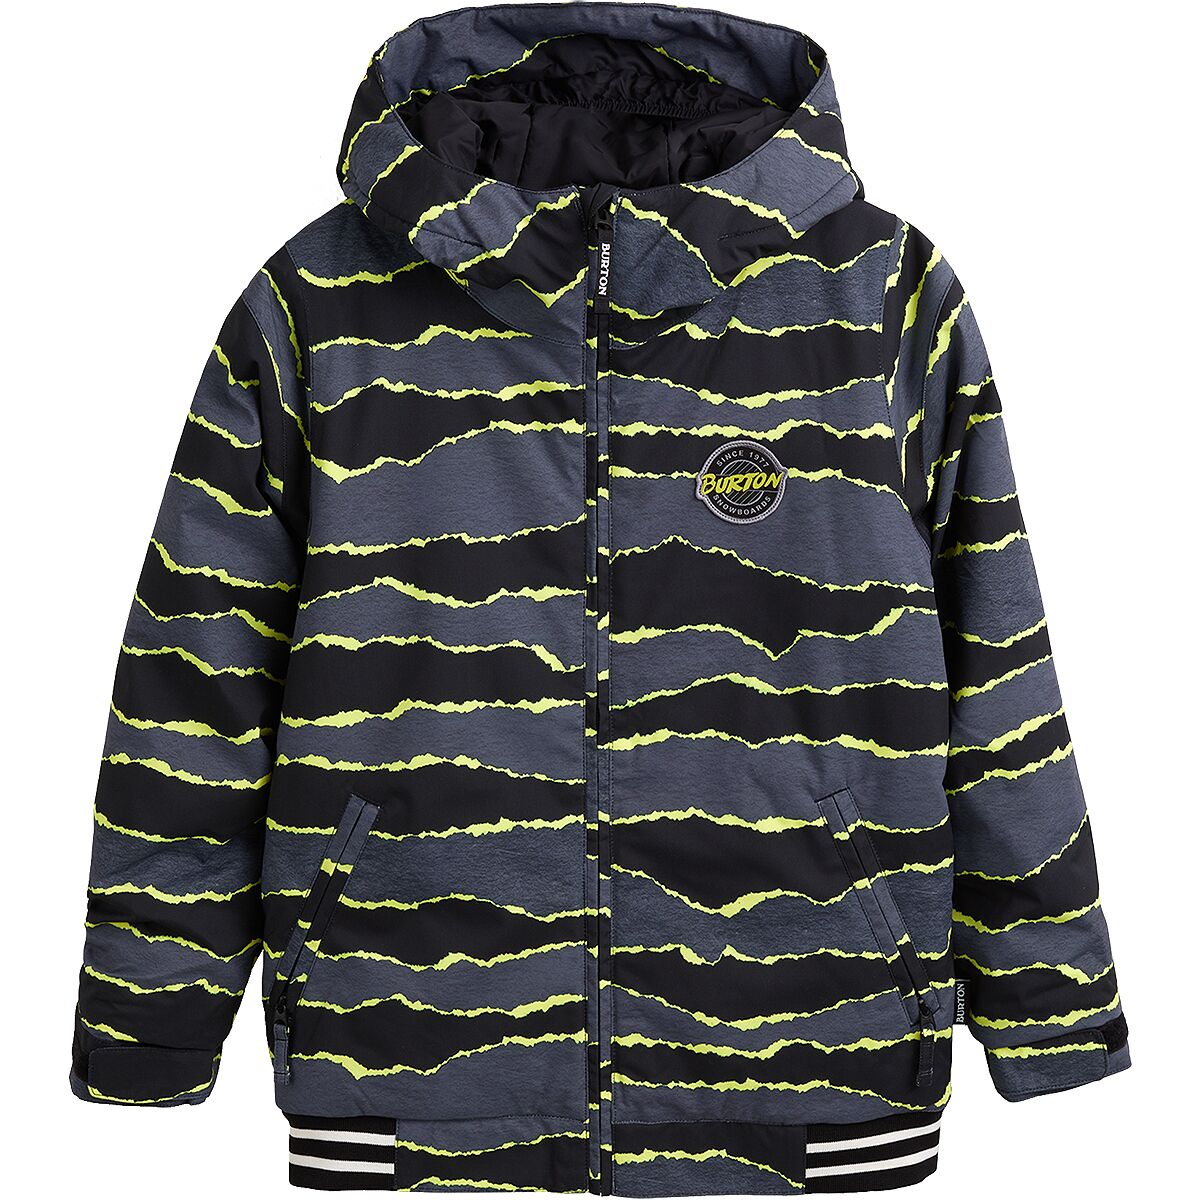 Game Day Insulated Jacket - Boys